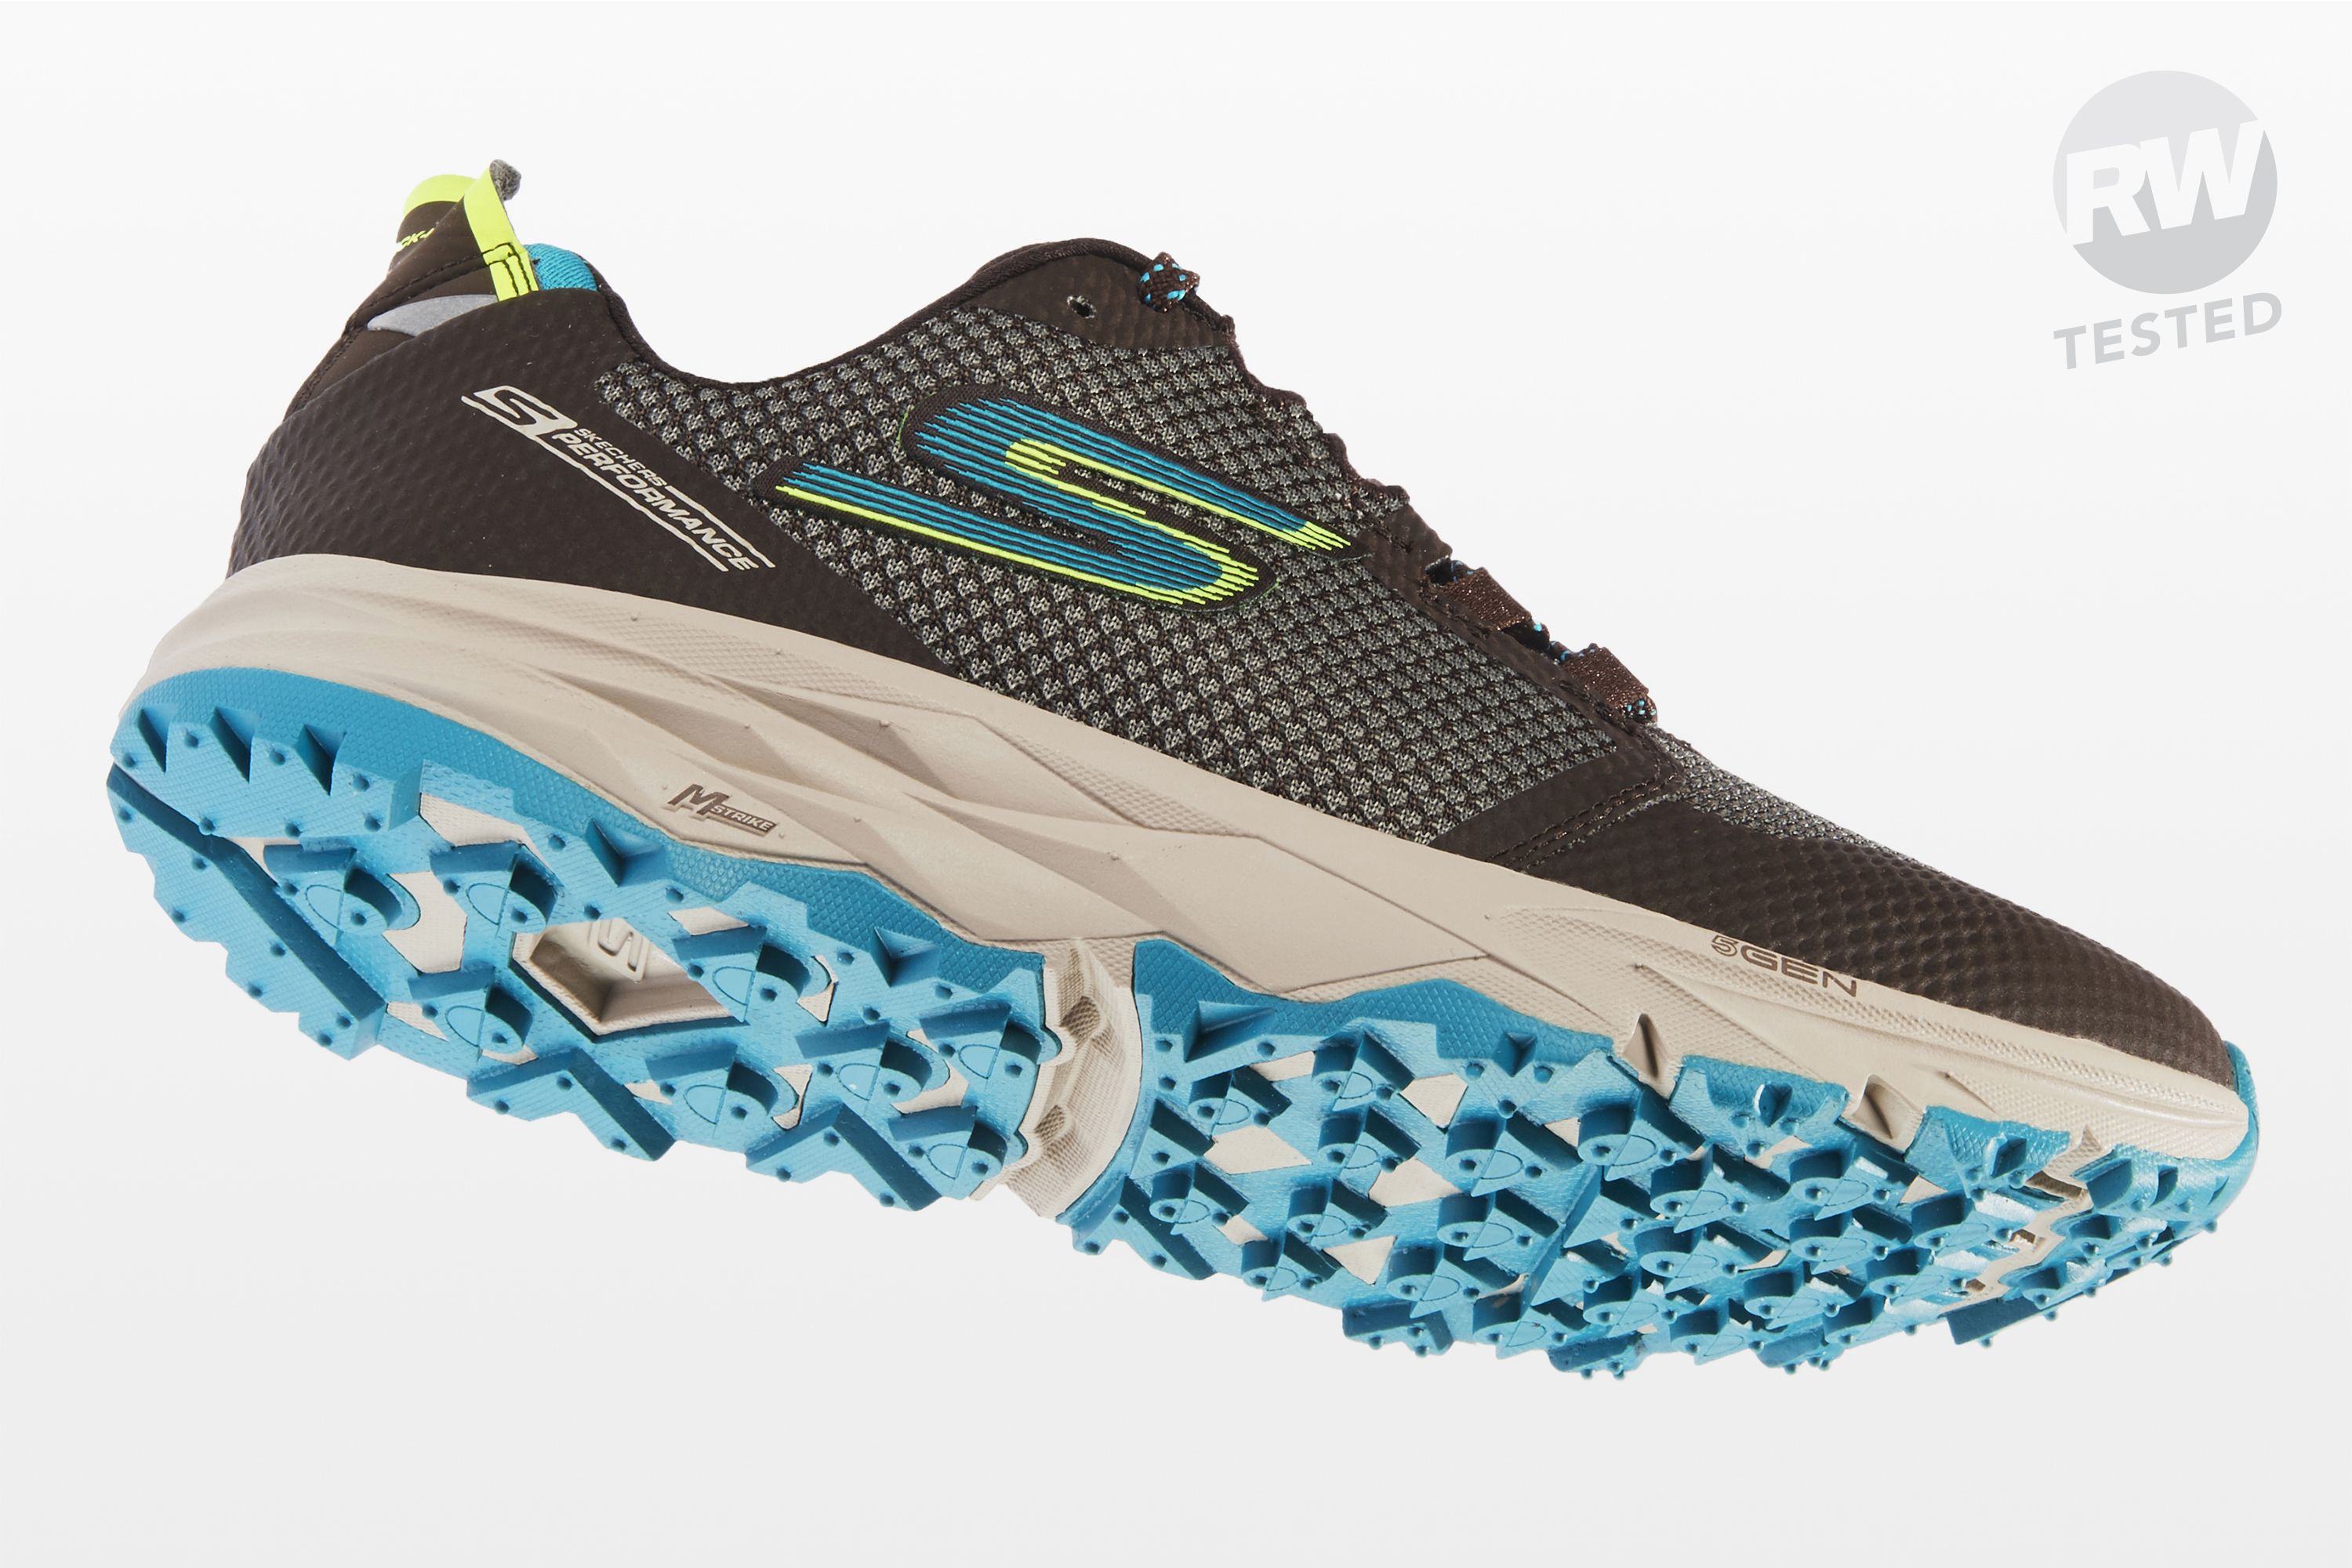 skechers go trail running shoes